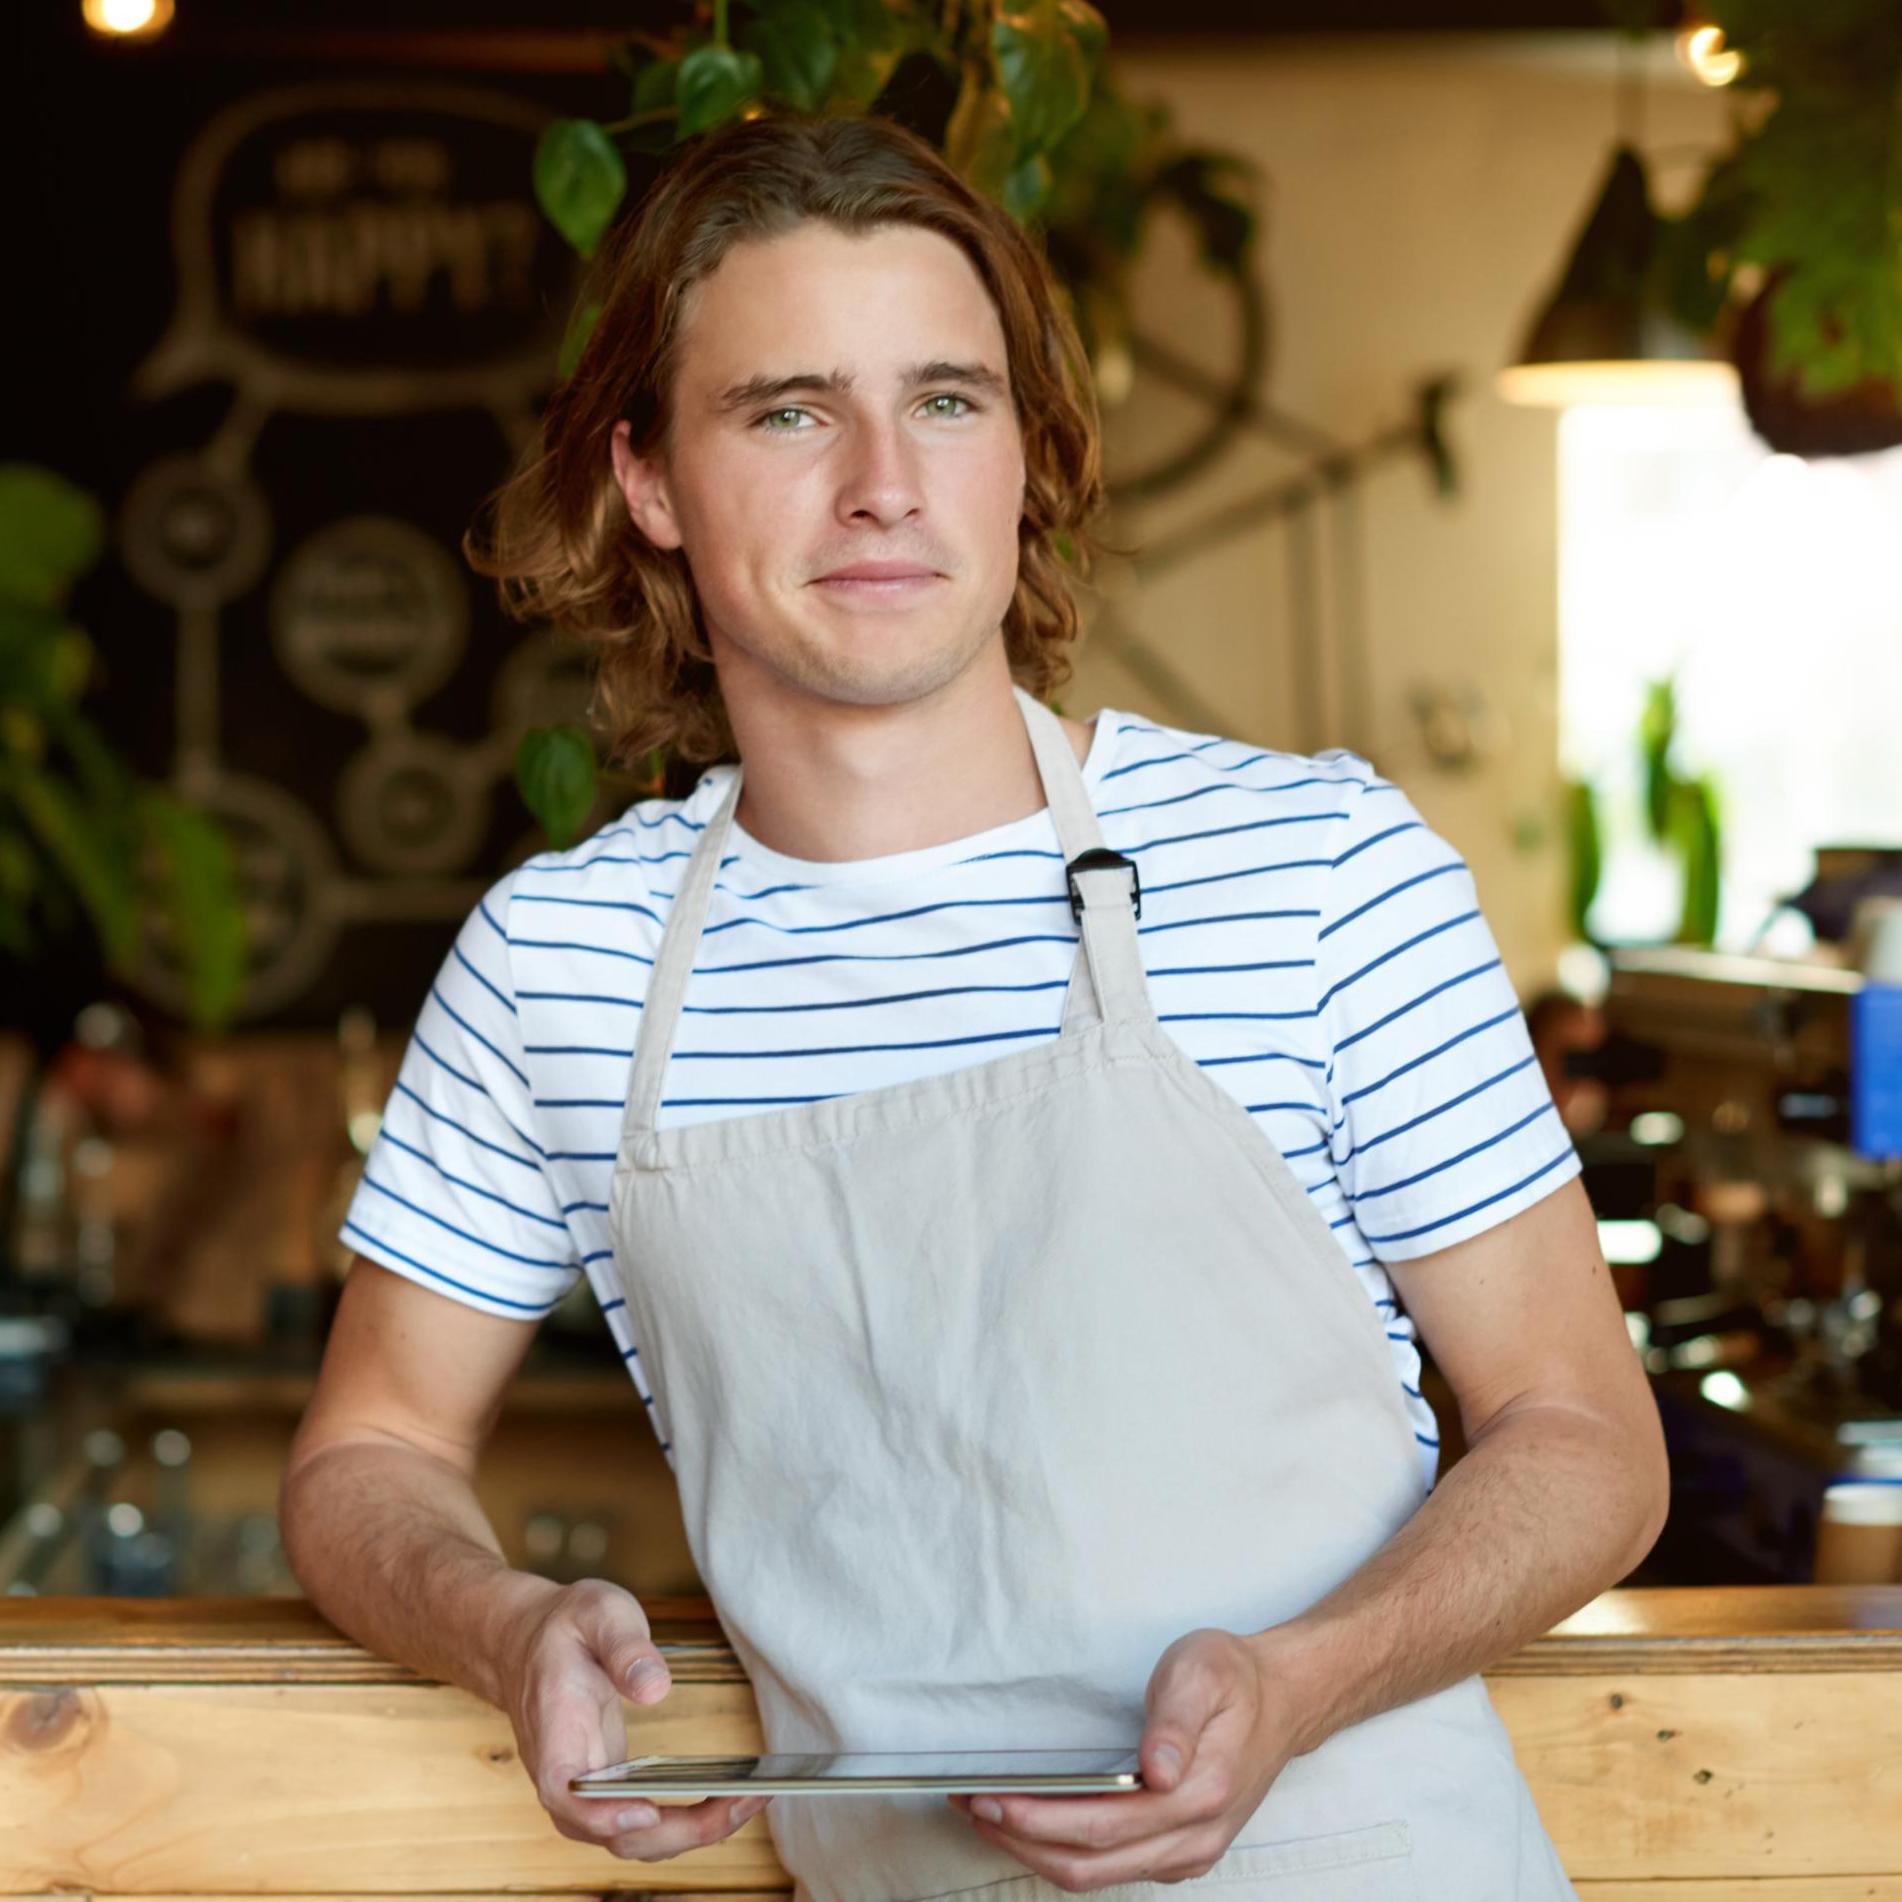 Young man working in a coffee shop